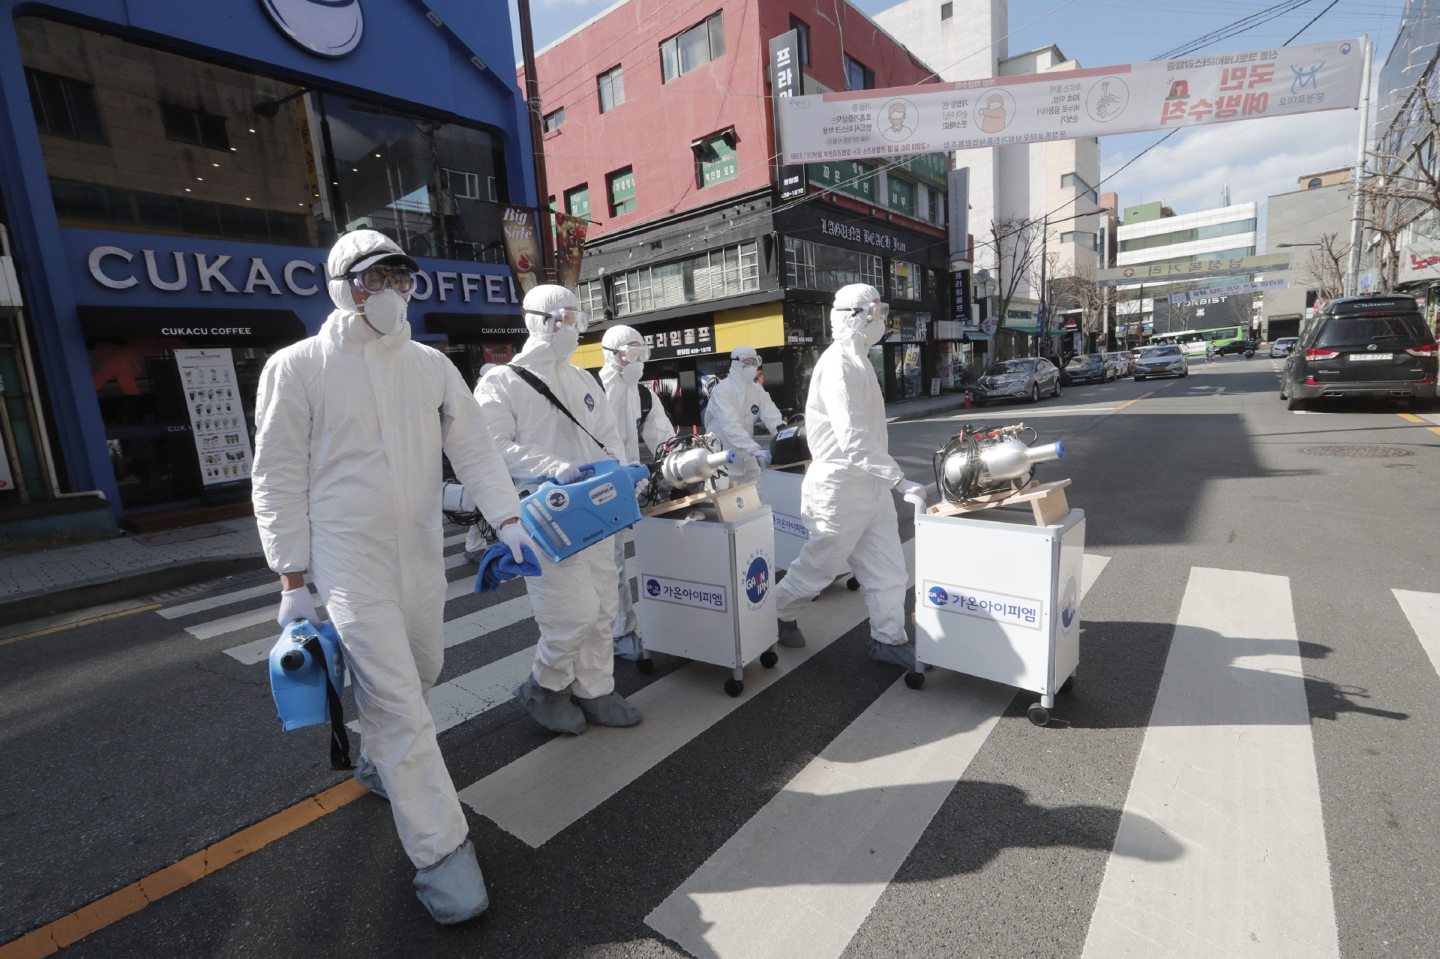 Workers wearing protective gear spray disinfectant as a precaution against the coronavirus in Seoul.